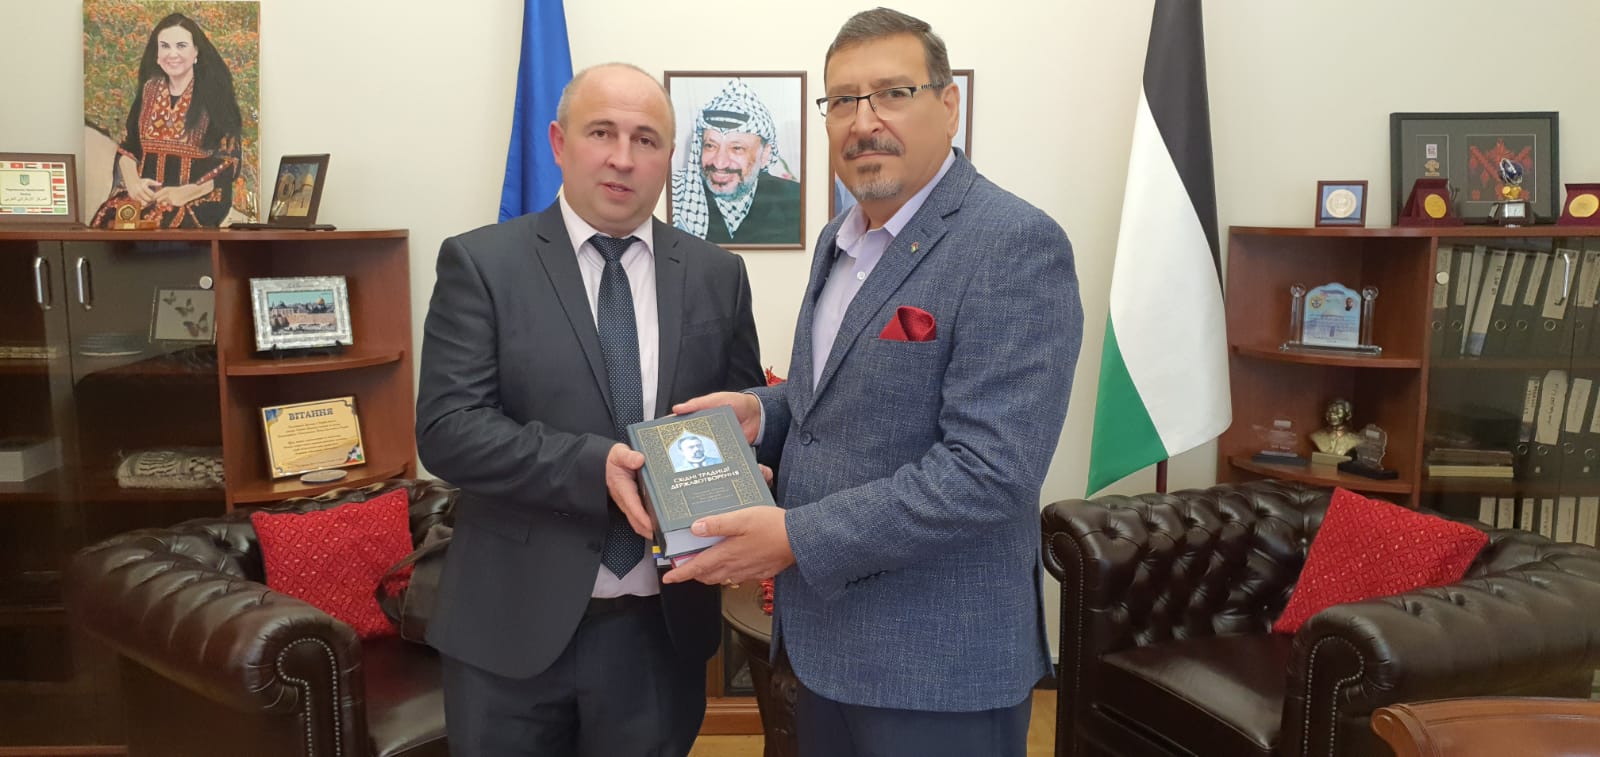 H.E. Ambassador Hashem Dajani with the Head of the author’s team of the scientific book “Eastern traditions of state formation” Mr. Volodymyr Omelchuk